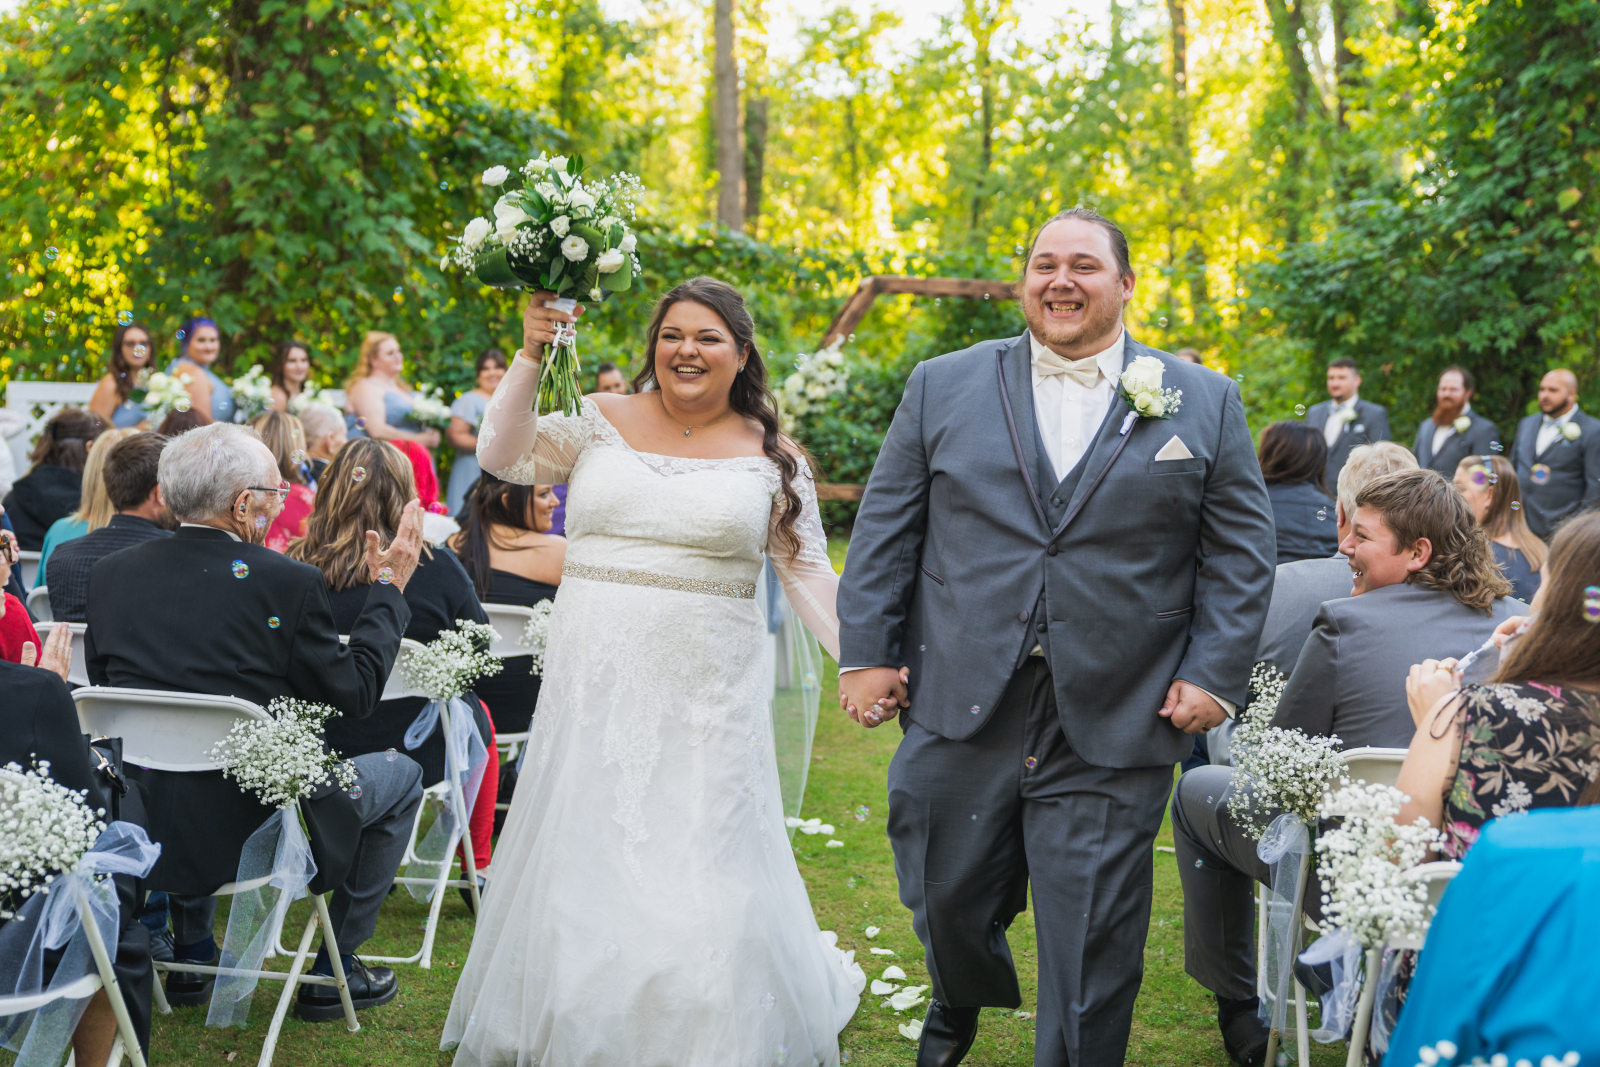 Bride and groom smiling, wedding recessional, hexagon arch, green, nature, trees, outdoor September wedding ceremony at Westfall Event Center